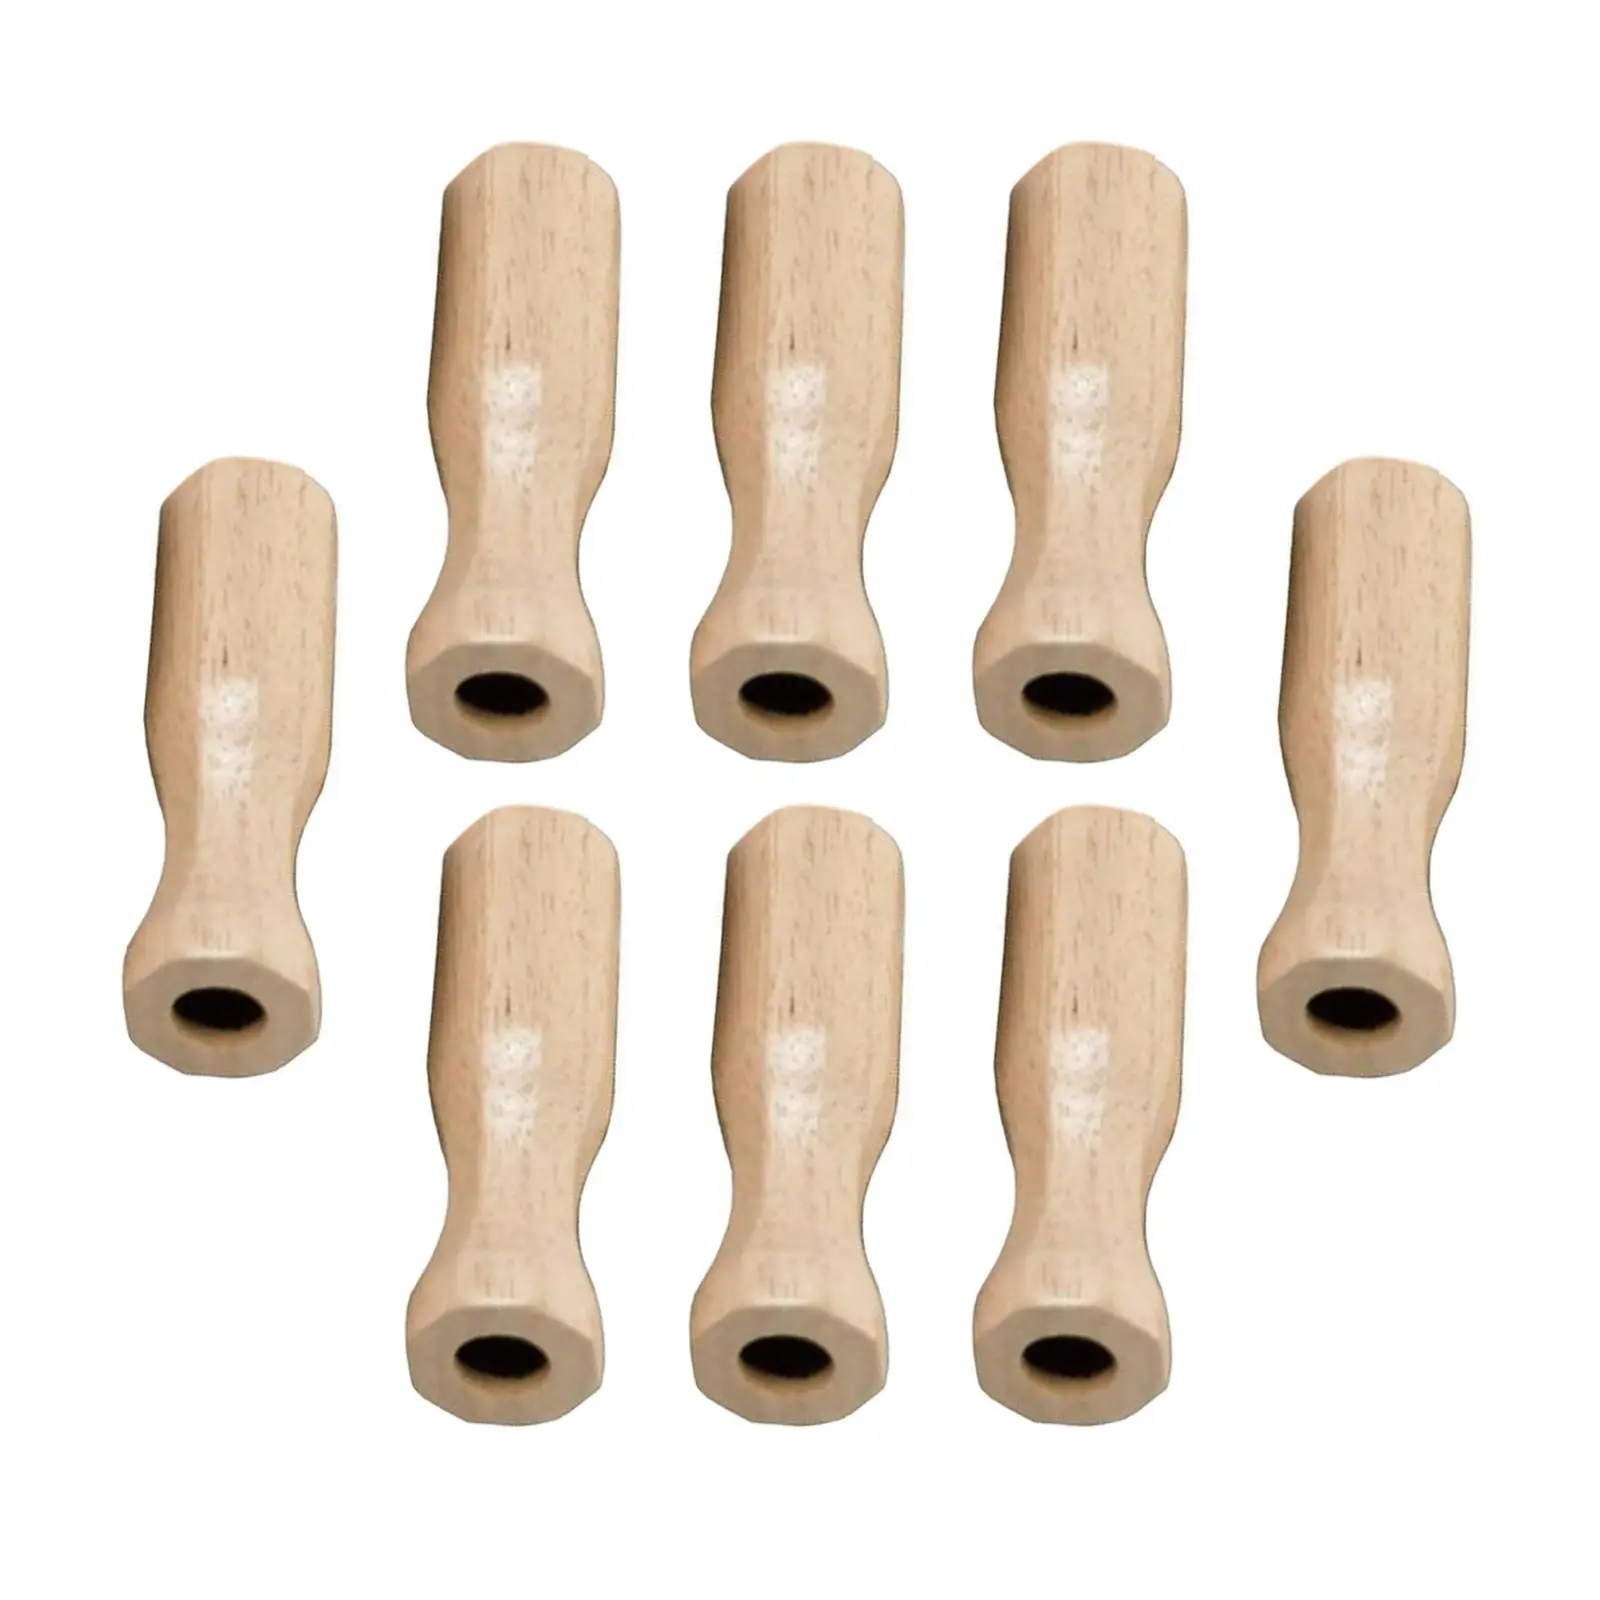 8x Soccer Table Handles Lightweight Wooden Foosball Handle Grip for Game Table